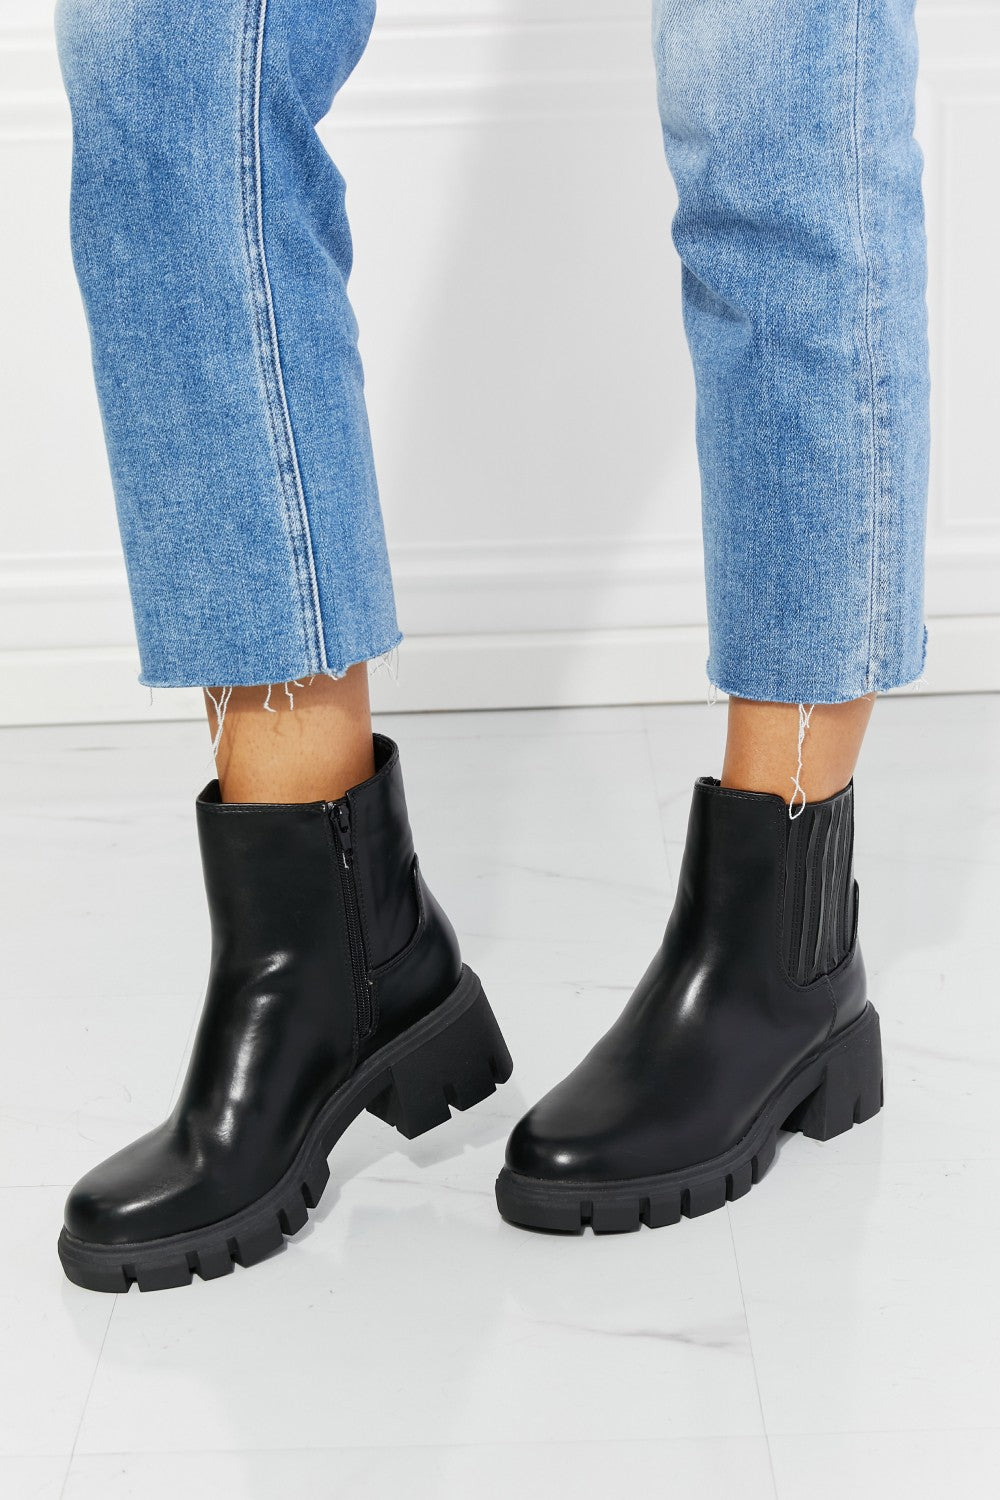 Dark Slate Gray MMShoes What It Takes Lug Sole Chelsea Boots in Black Sentient Beauty Fashions shoes